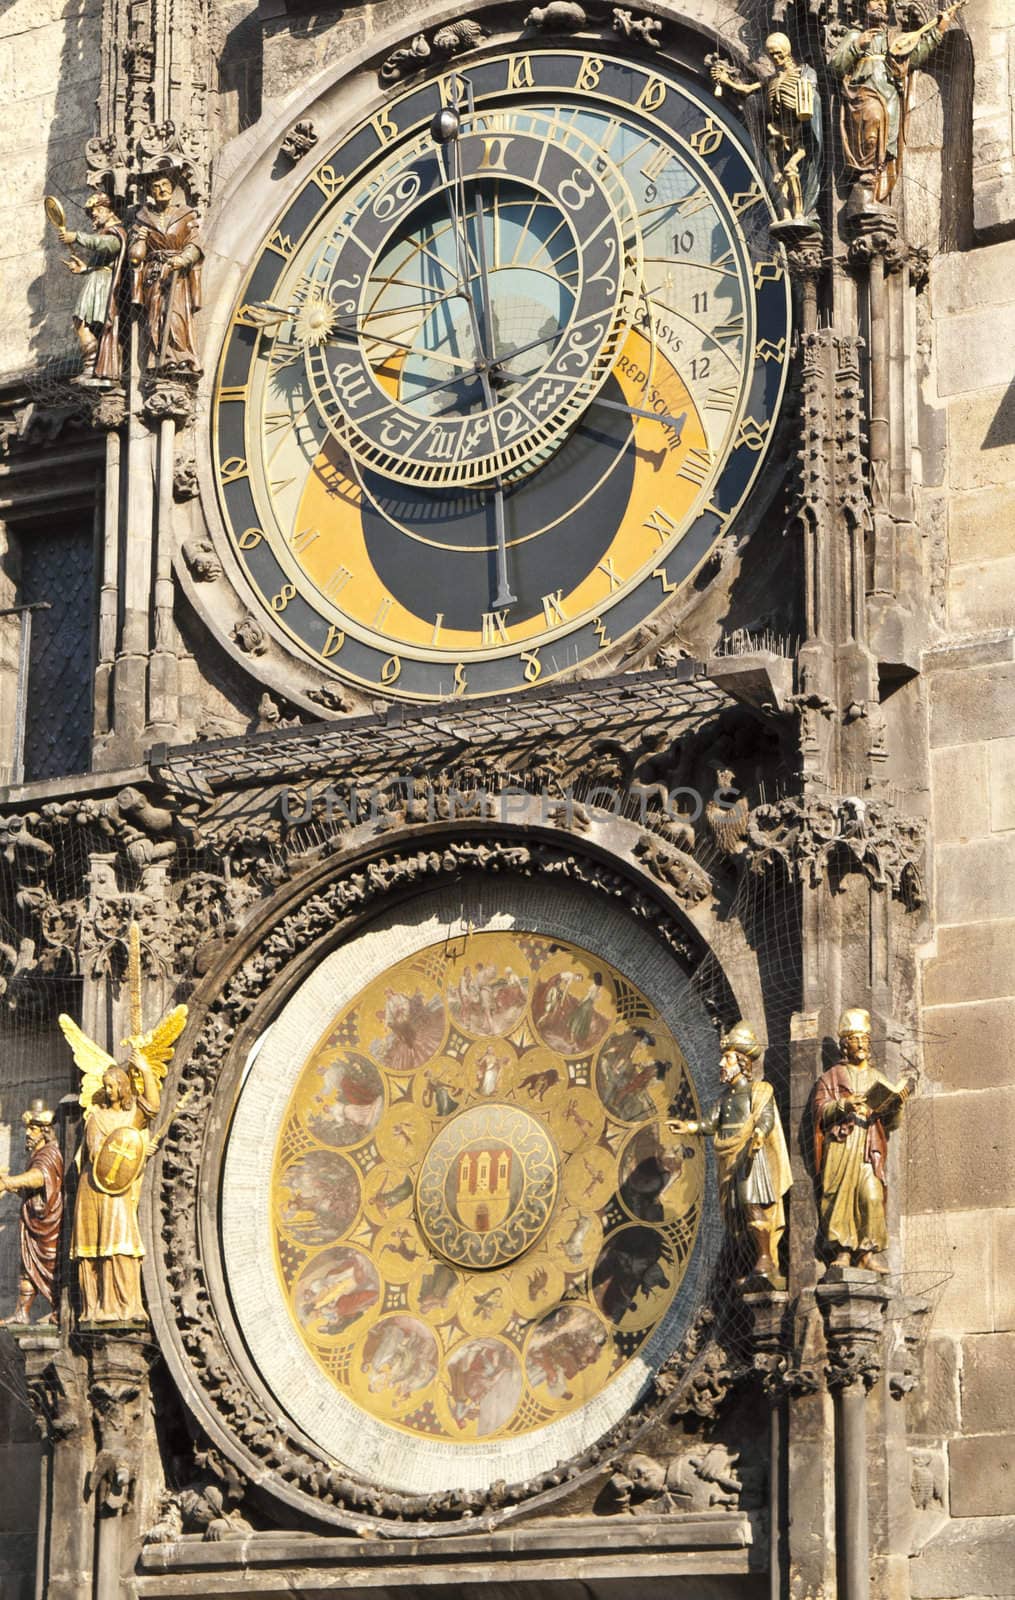 Old famous astronomical clock tower in Prague